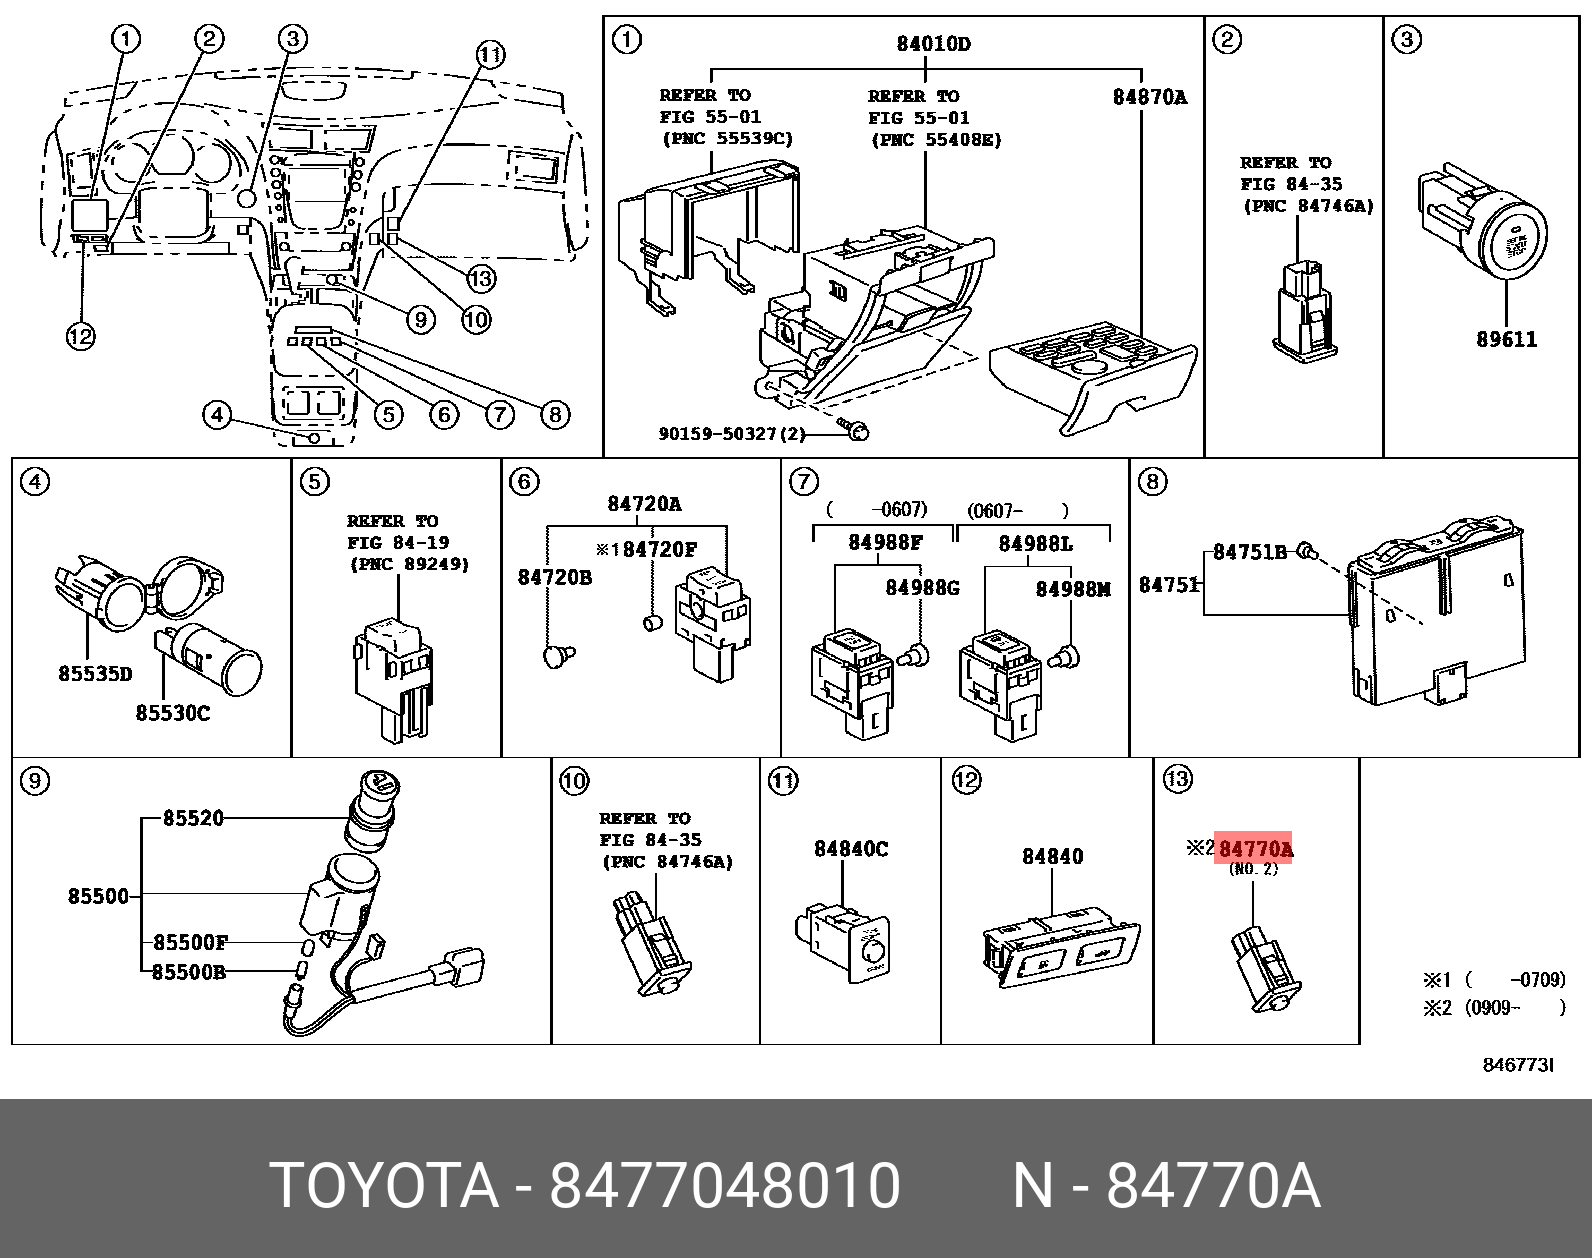 PRIUS 200904 - 201511, SWITCH ASSY, PRE-COLLISION SYSTEM CANCEL